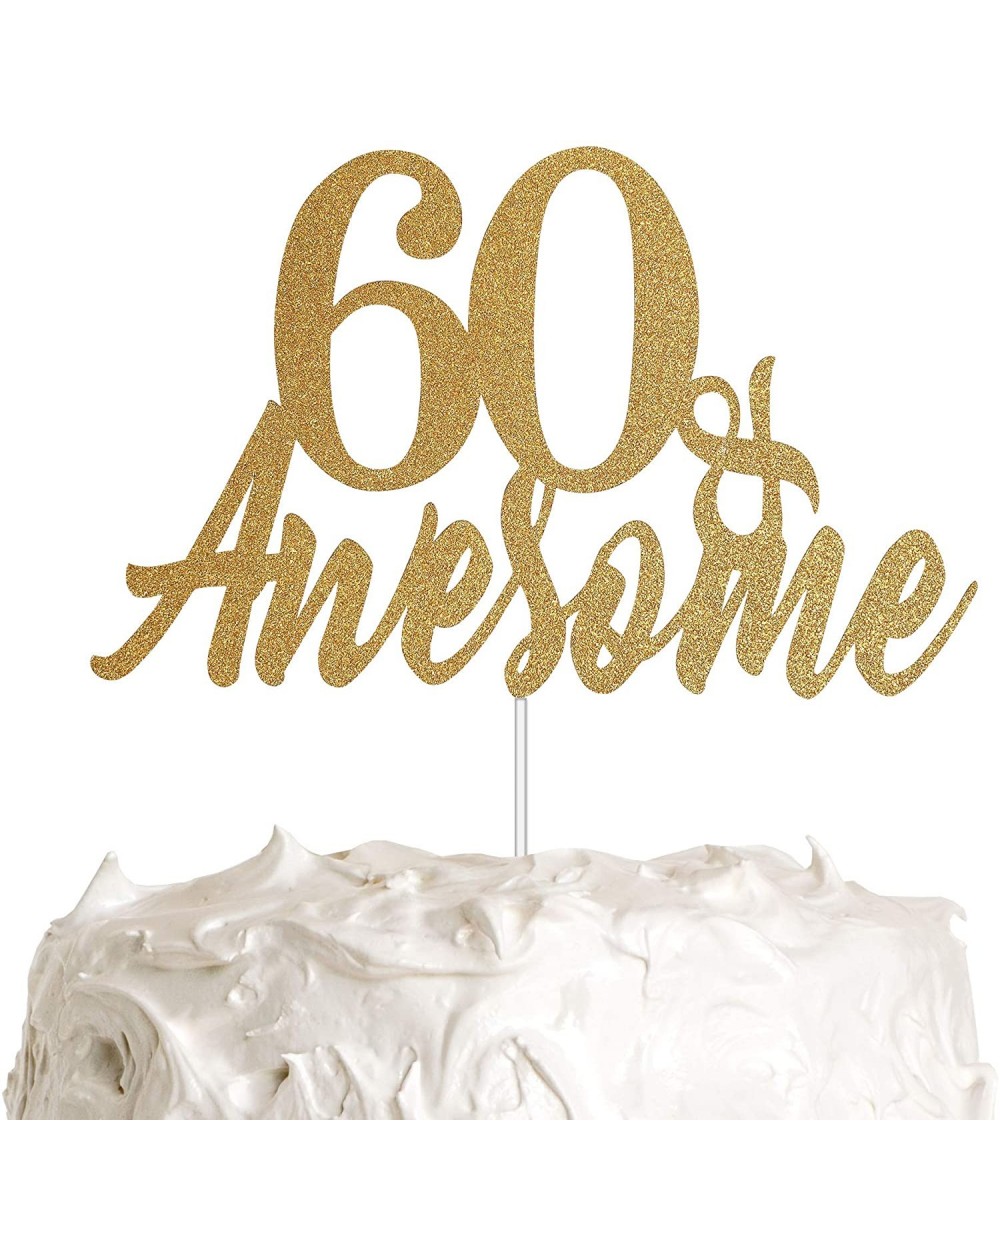 Cake & Cupcake Toppers 60 Awesome Cake Topper- 60th Birthday Cake Topper- 60th Anniversary Cake Topper- Happy Birthday/Annive...